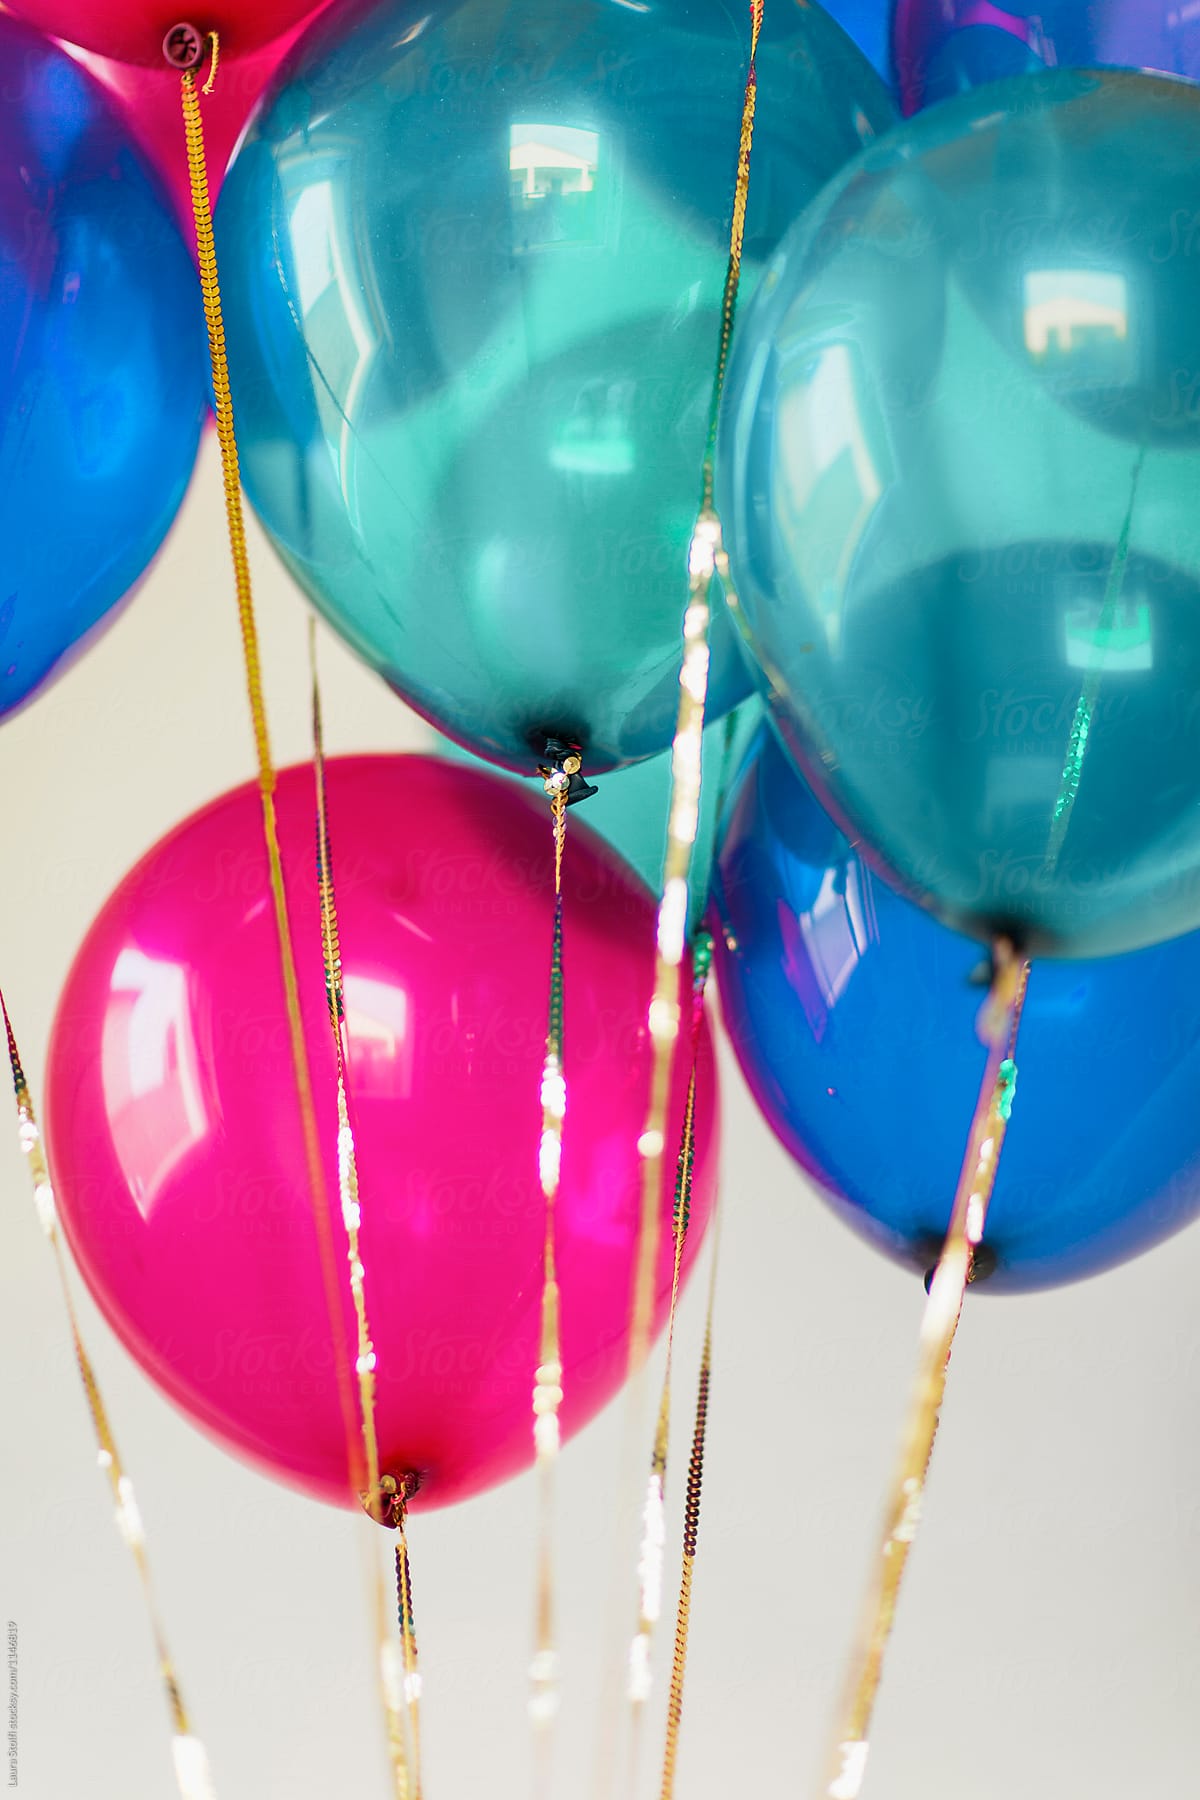 Flying Balloons And Gold Strings by Stocksy Contributor Laura Stolfi -  Stocksy